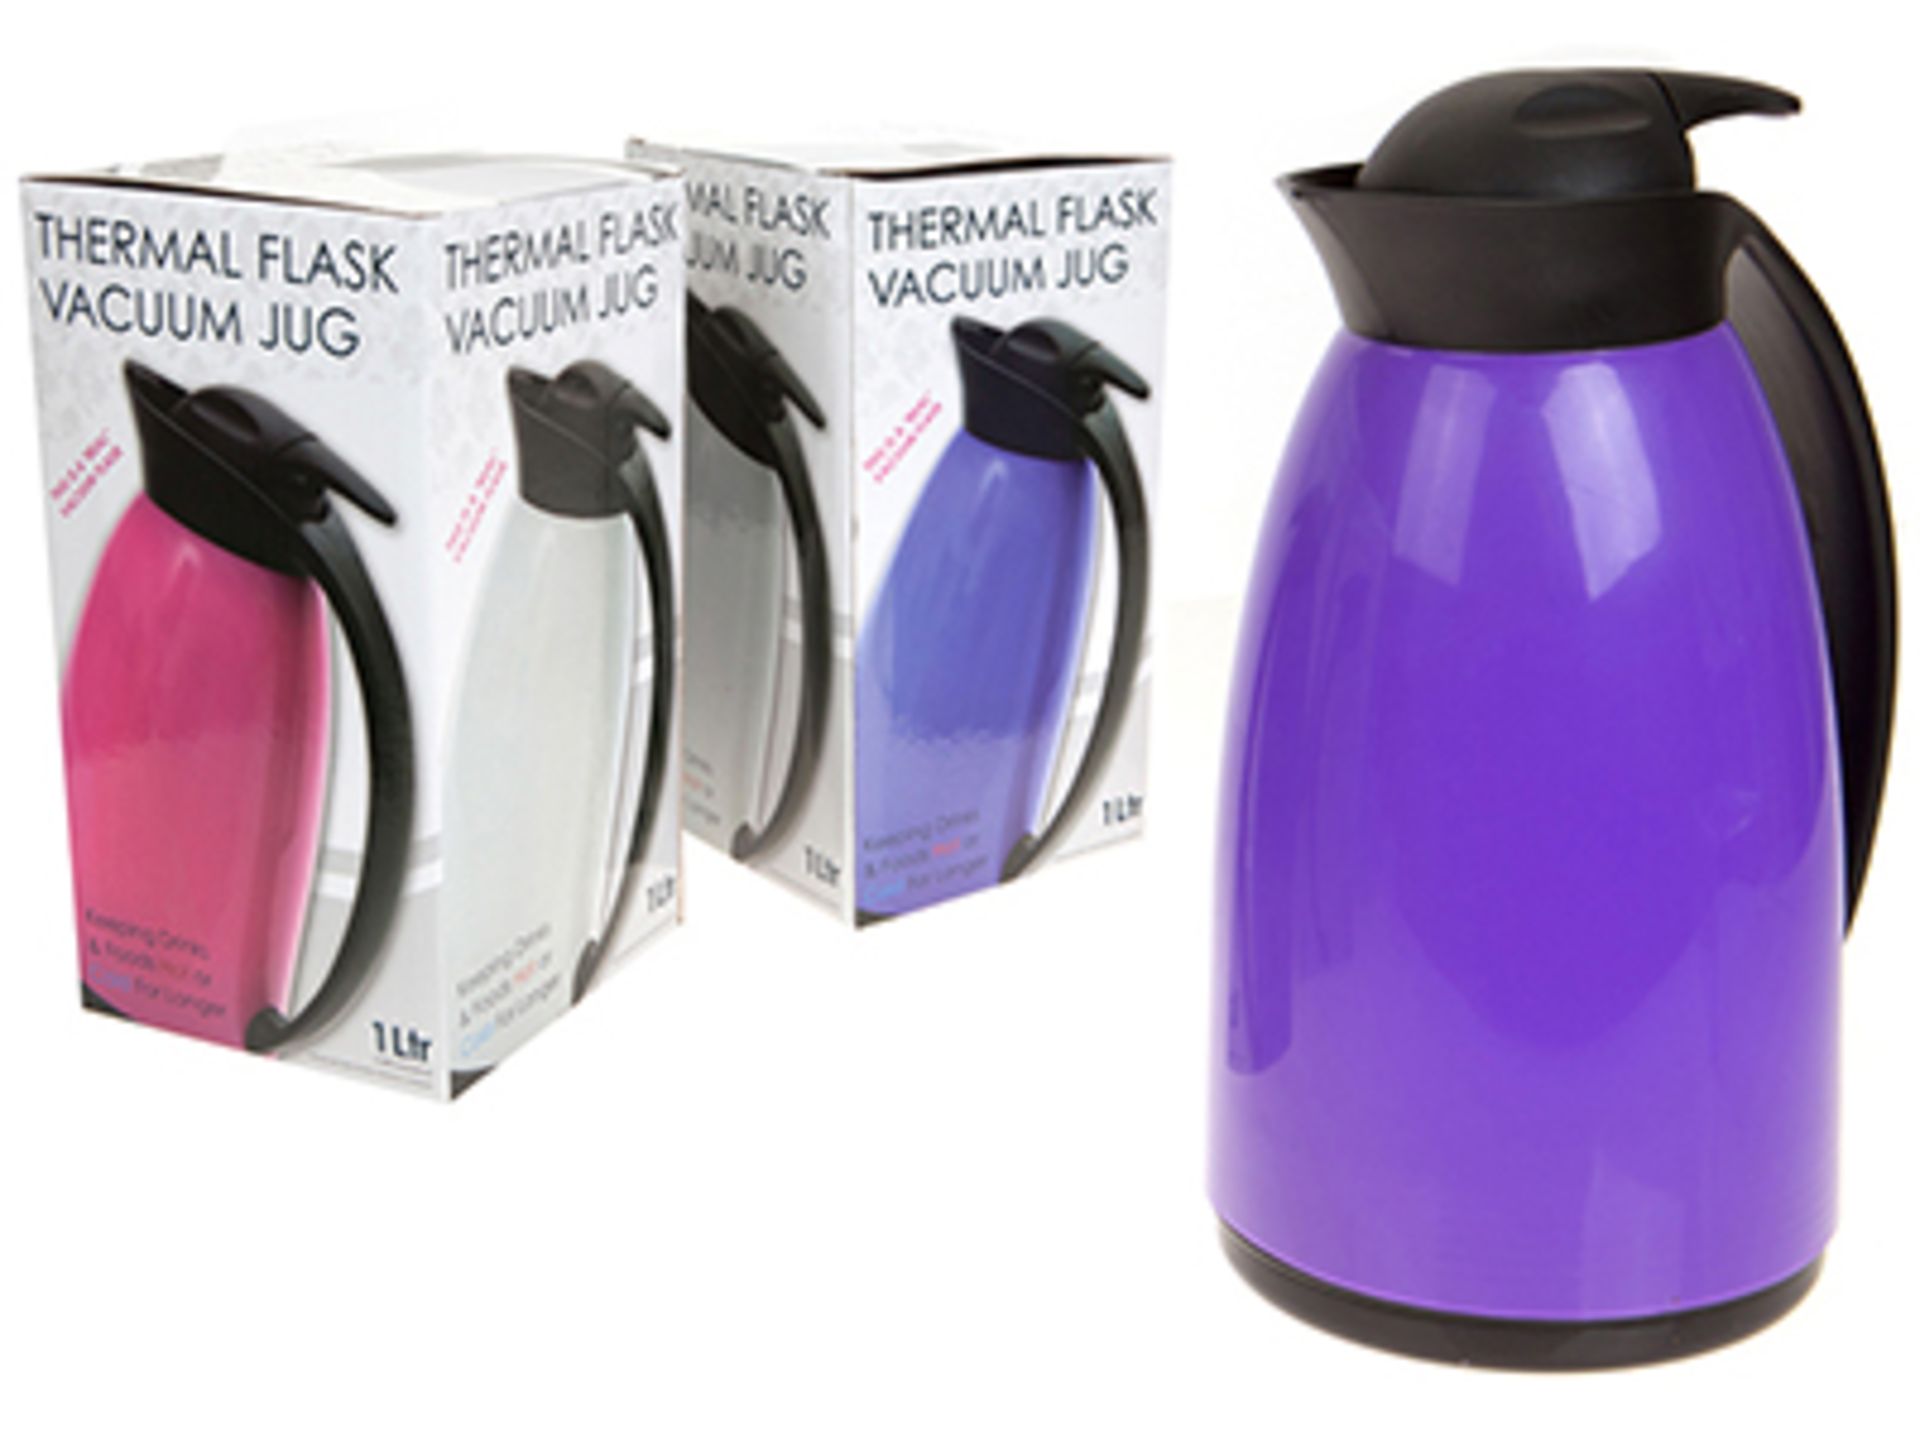 + VAT Brand New Thermal Flask Vacuum Jug - 1 Litre - Quick Release Valve To Pour On The Go Without